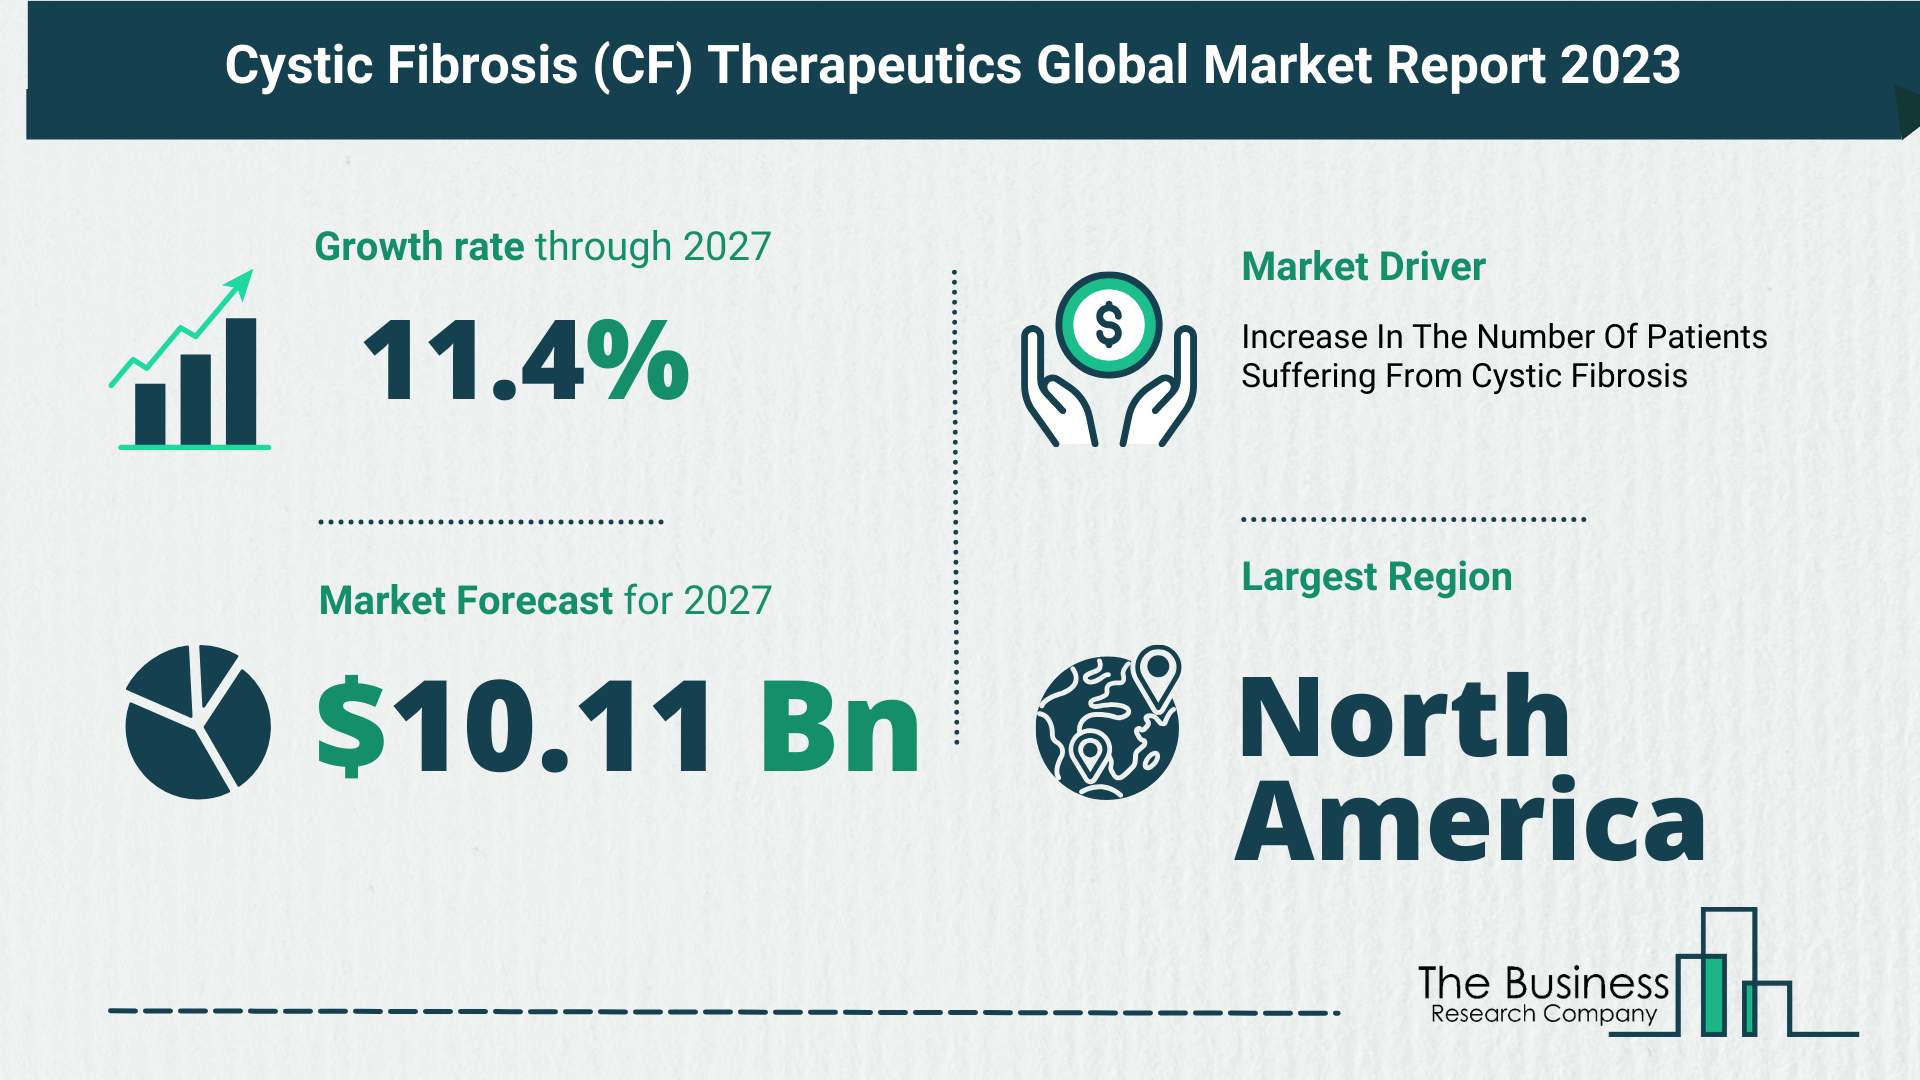 Top 5 Insights From The Cystic Fibrosis (CF) Therapeutics Market Report 2023